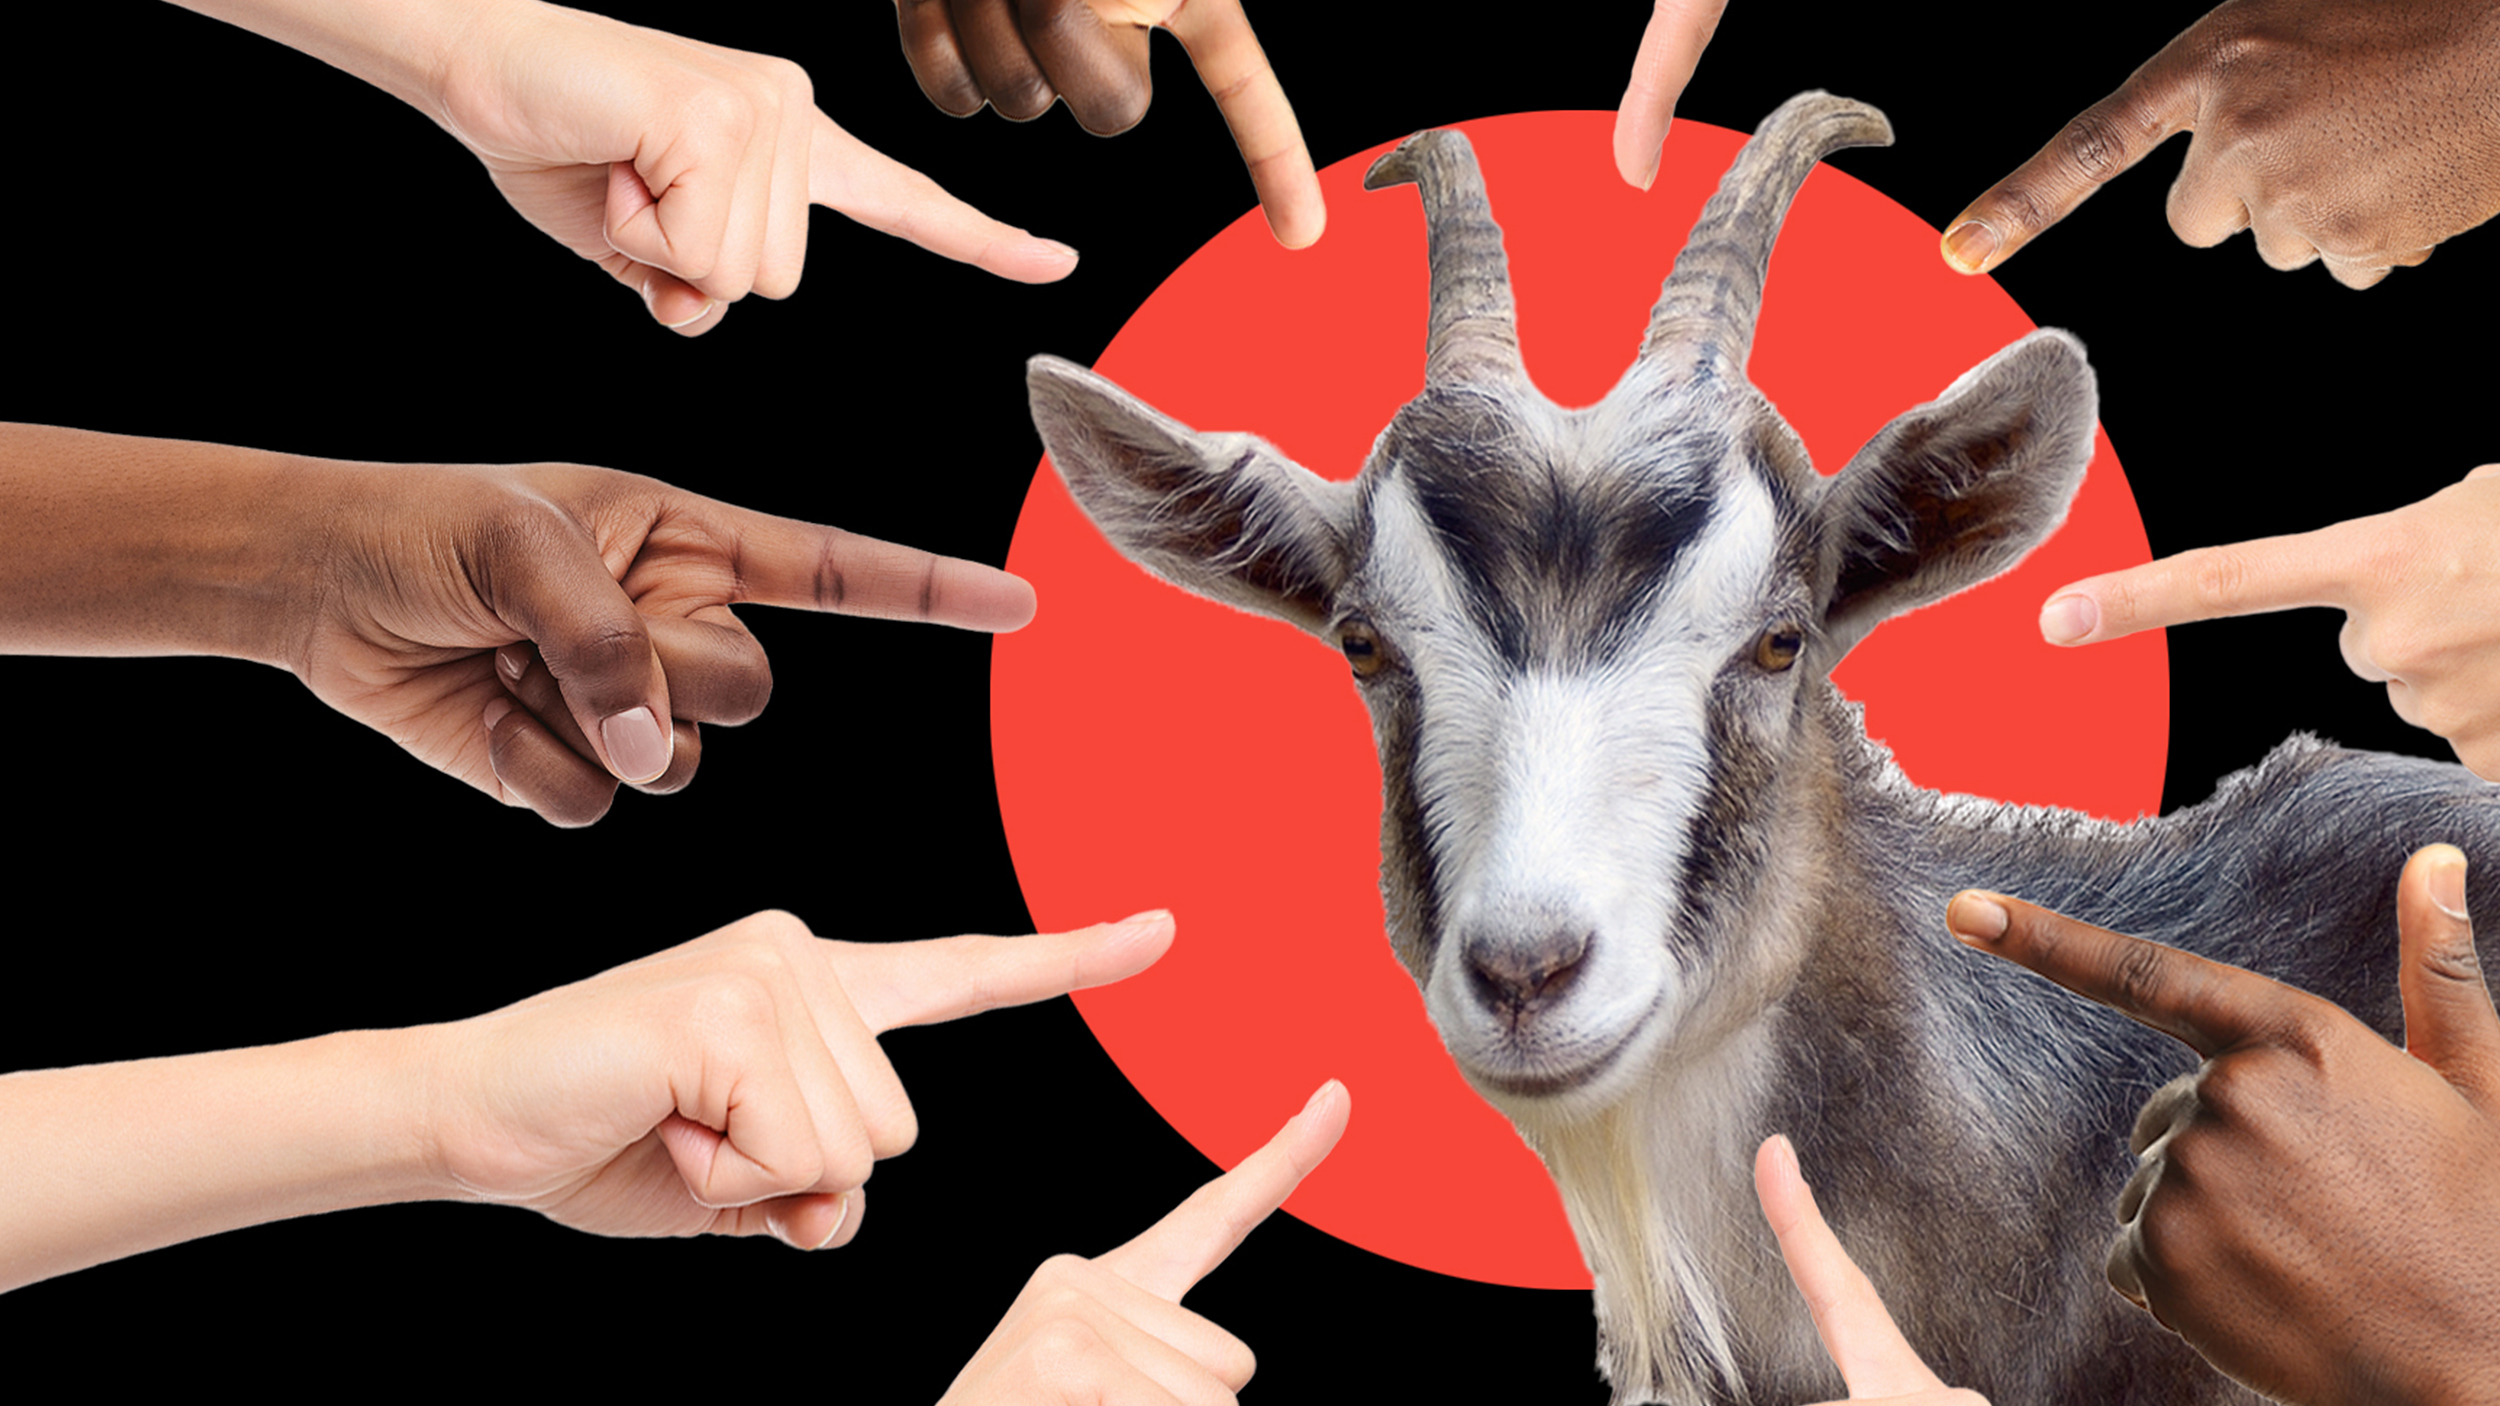 Everyone pointing fingers at a goat